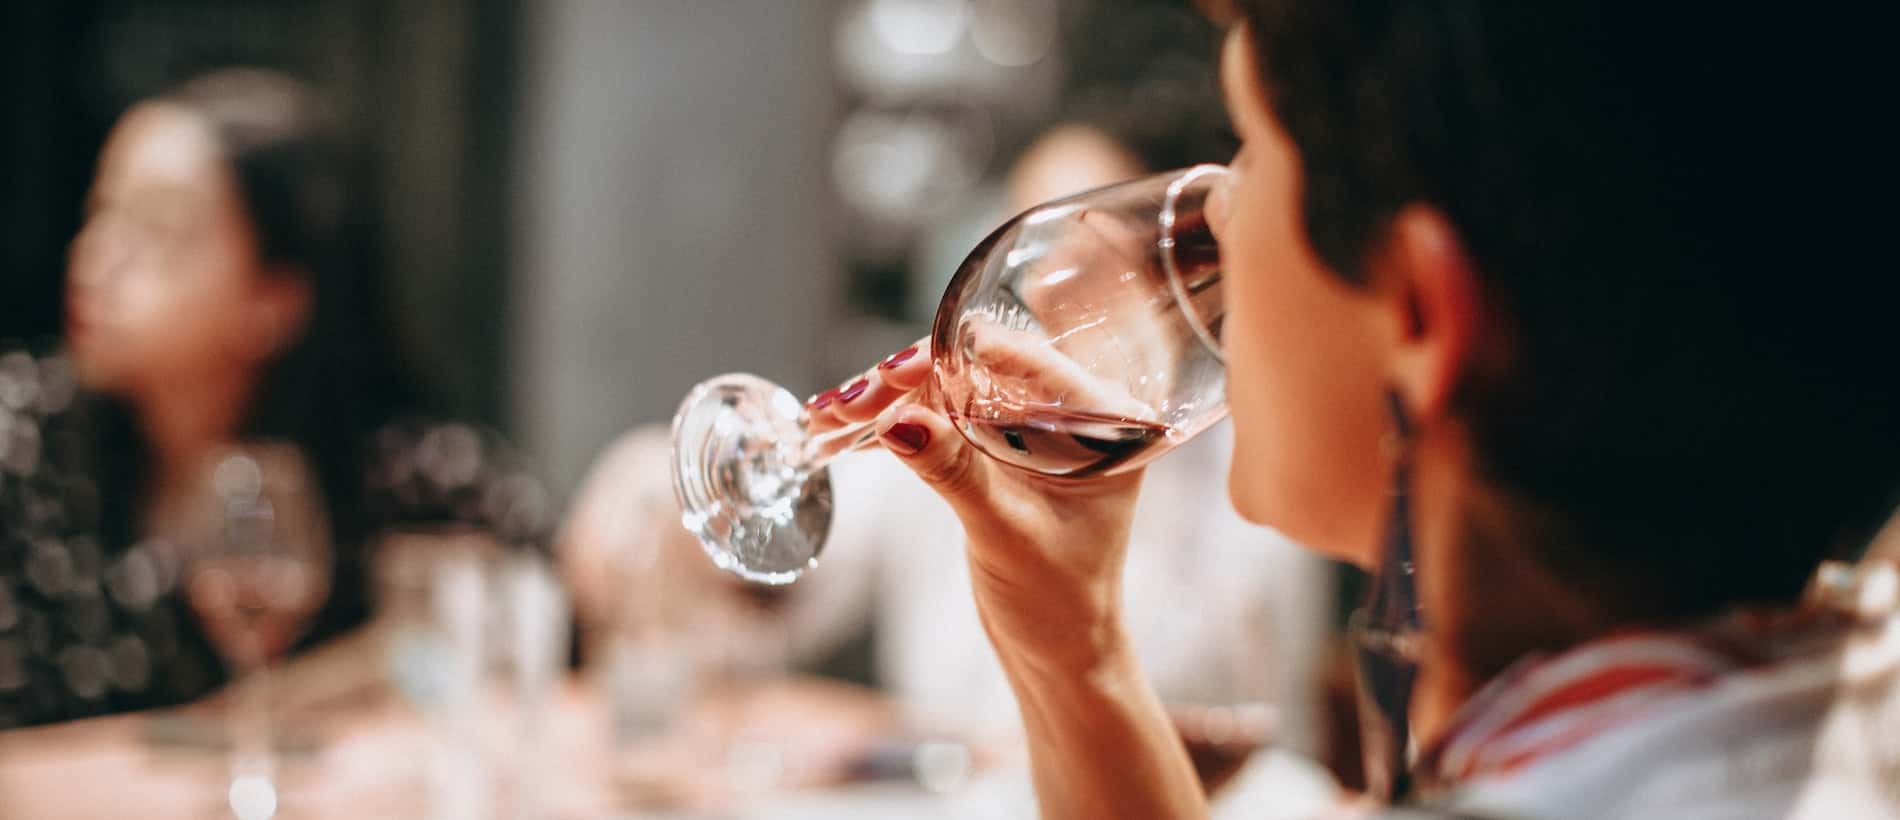 How to Host a Blind Wine Tasting Party - Savored Journeys